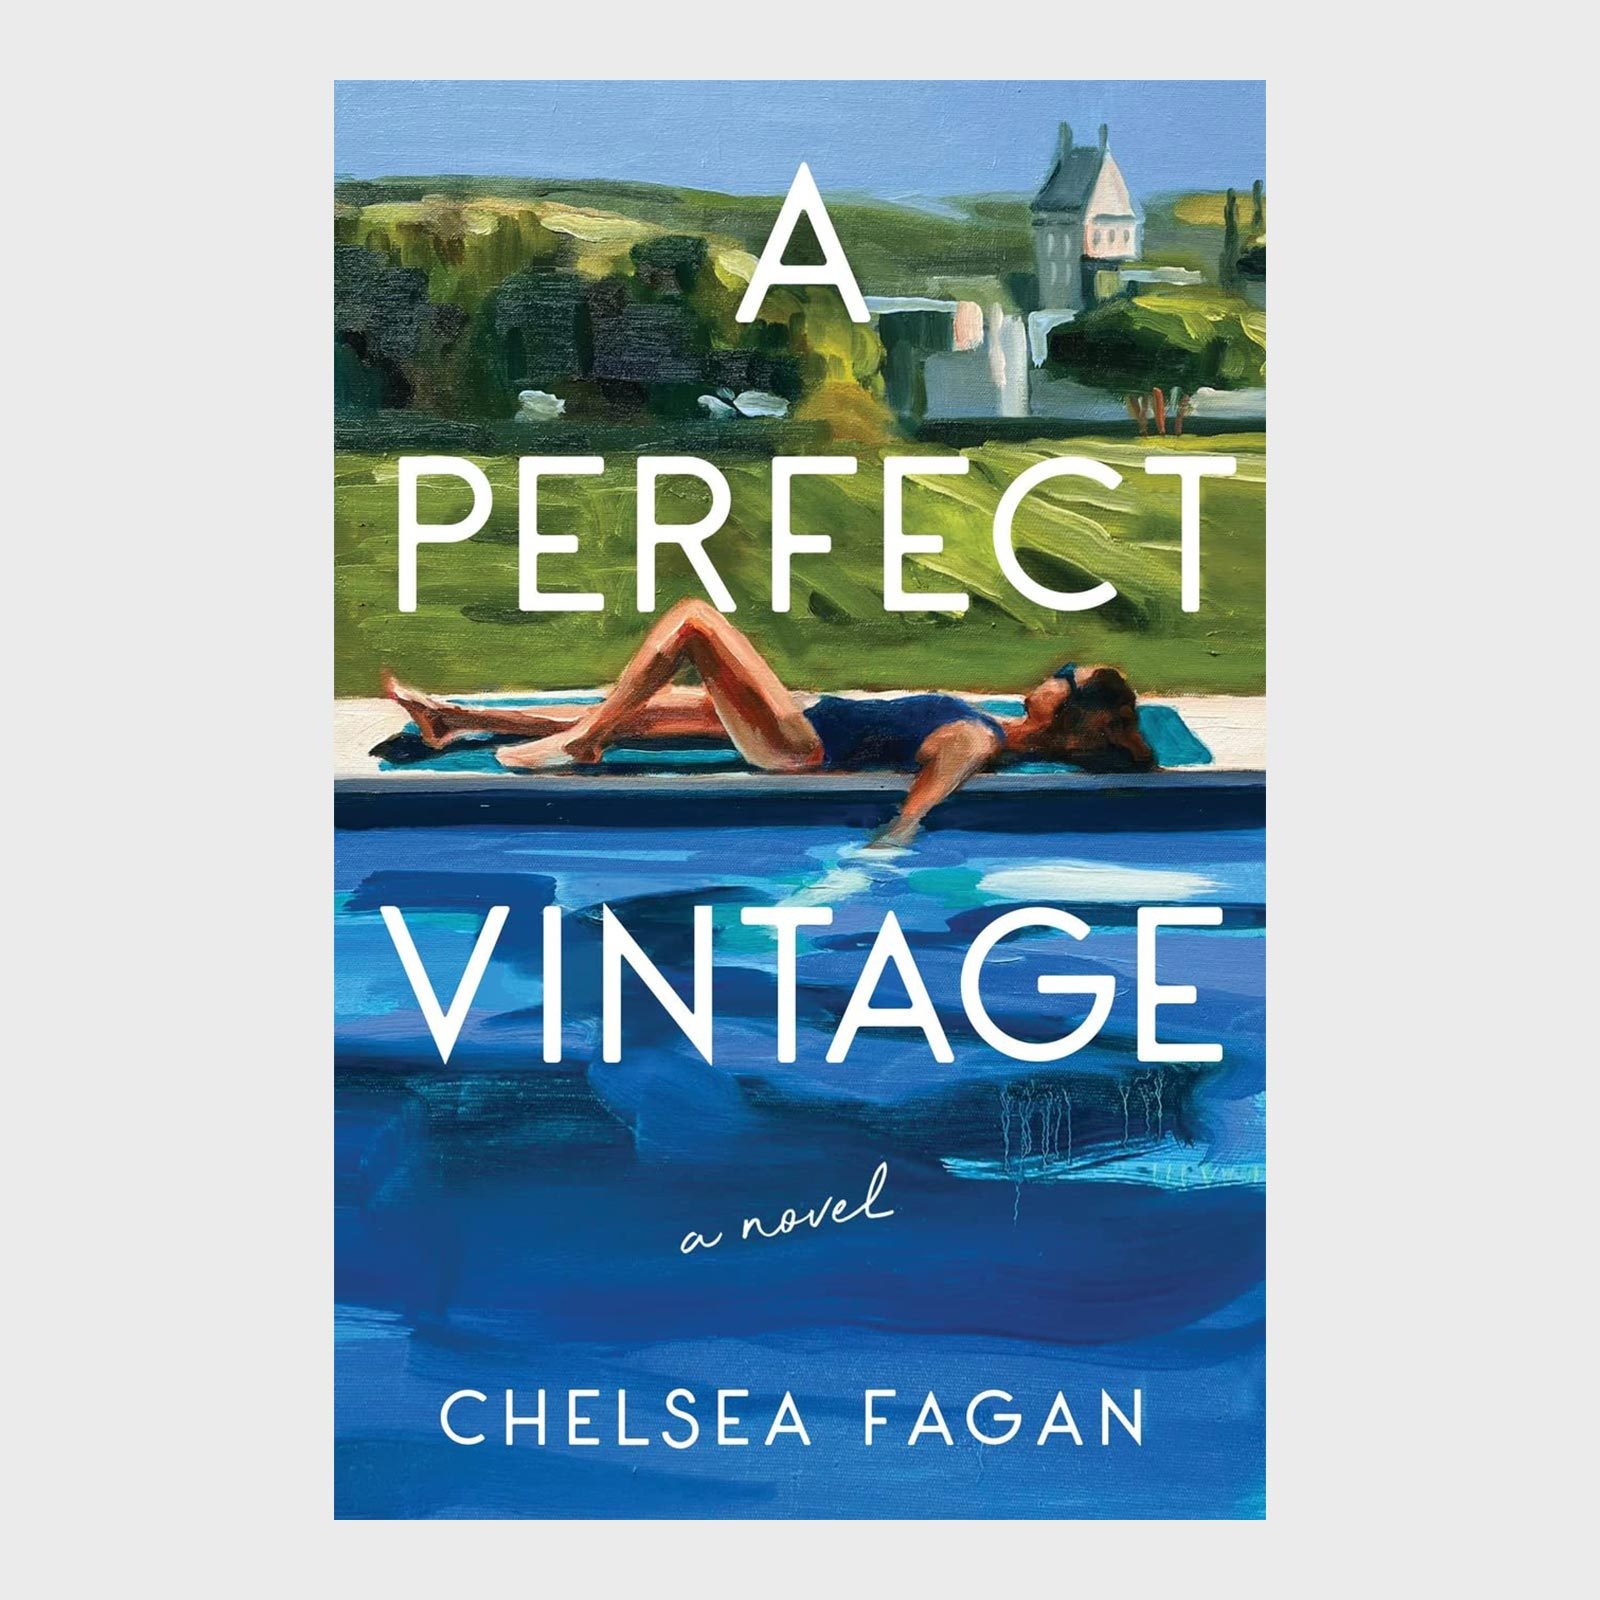 <h3><em>A Perfect Vintage </em>by Chelsea Fagan</h3> <p><strong>Setting:</strong> Loire Valley, central France</p> <p>Chelsea Fagan's first novel, <em><a href="https://www.amazon.com/Perfect-Vintage-Chelsea-Fagan-ebook/dp/B0BY9CSPC5" rel="noopener noreferrer">A Perfect Vintage</a></em>, debuts on June 6, just days before the summer solstice. Fagan lives in France, which gives her a leg up on delectable descriptions of French food and the sun-soaked land of France's Loire Valley. The perfect setting aside, the book details a summer in the life of Lea Mortimer, a successful 30-something woman who's too busy and independent to worry about relationships or starting a family.</p> <p>She's been summoned by work to France to help transform an old French estate into a perfect boutique hotel. All's well until Lea begins to develop feelings for the considerably younger son of her new boss. It's a deliciously self-aware, beautifully set <a href="https://www.rd.com/list/books-written-by-female-authors/" rel="noopener noreferrer">story of a modern woman</a> struggling to have it all: money, deep friendships ... and maybe even love.</p> <p class="listicle-page__cta-button-shop"><a class="shop-btn" href="https://www.amazon.com/Perfect-Vintage-Chelsea-Fagan-ebook/dp/B0BY9CSPC5">Shop Now</a></p>